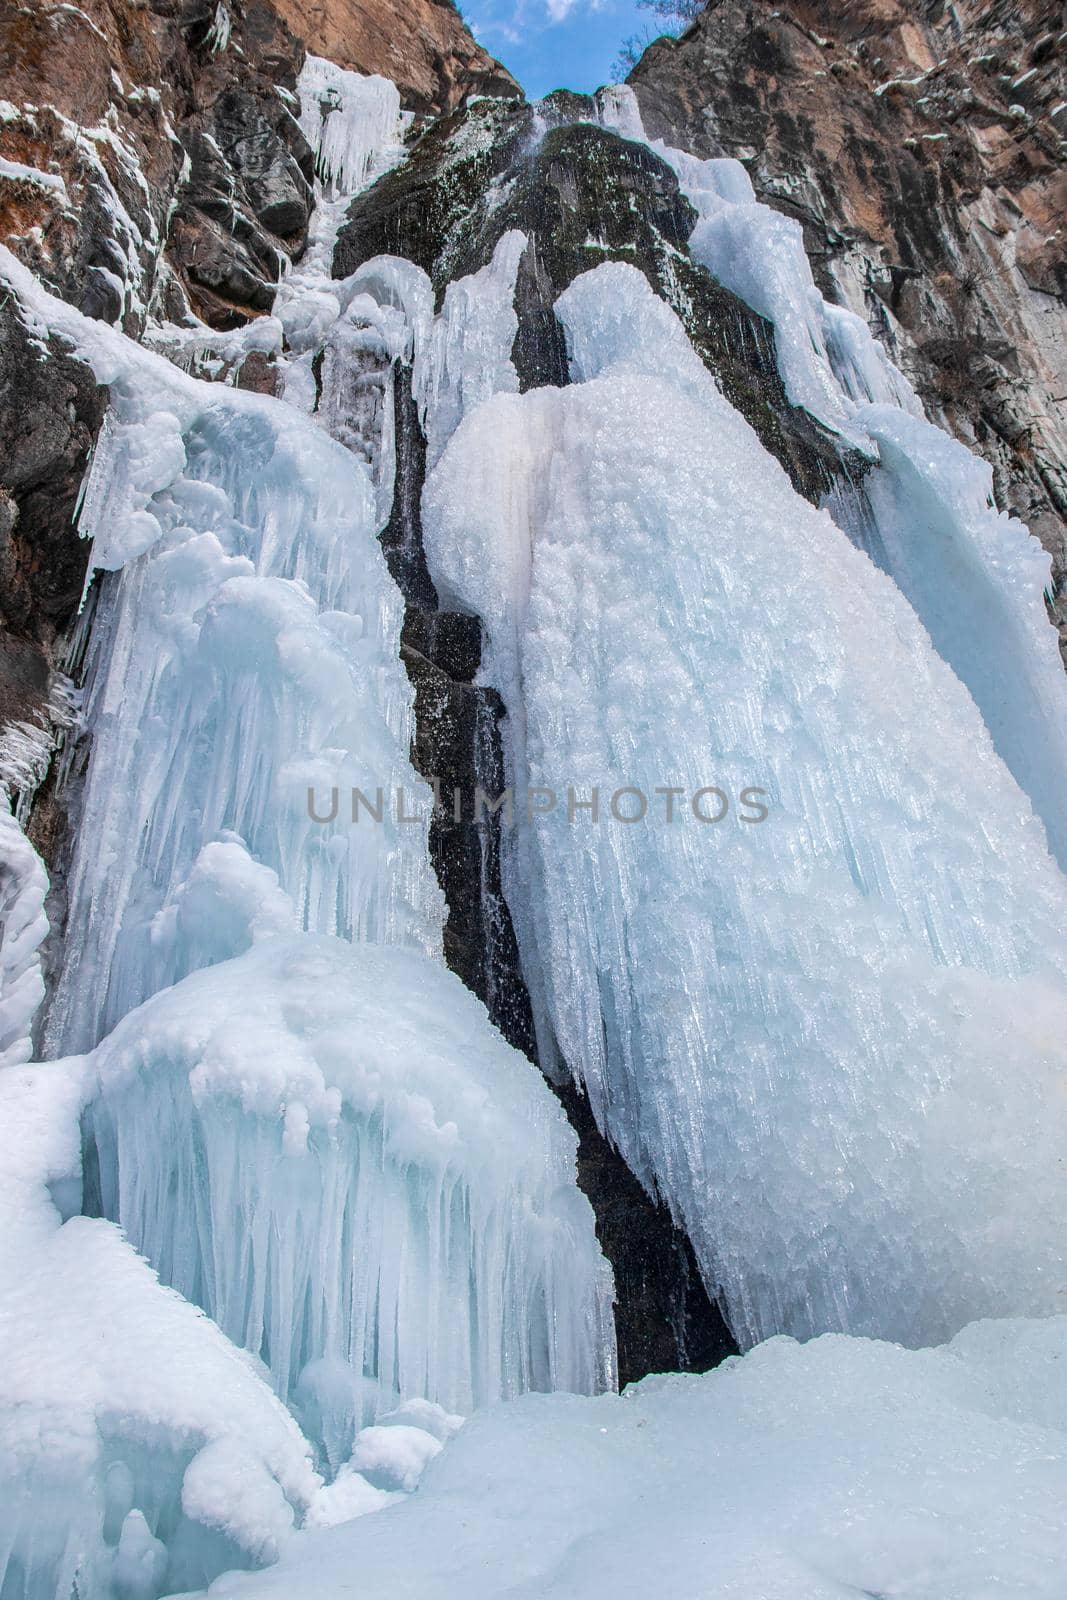 Frozen waterfall in the mountains of the Zailiyskiy Alatau in Central Asia. Winter trip around the outskirts of Almaty.